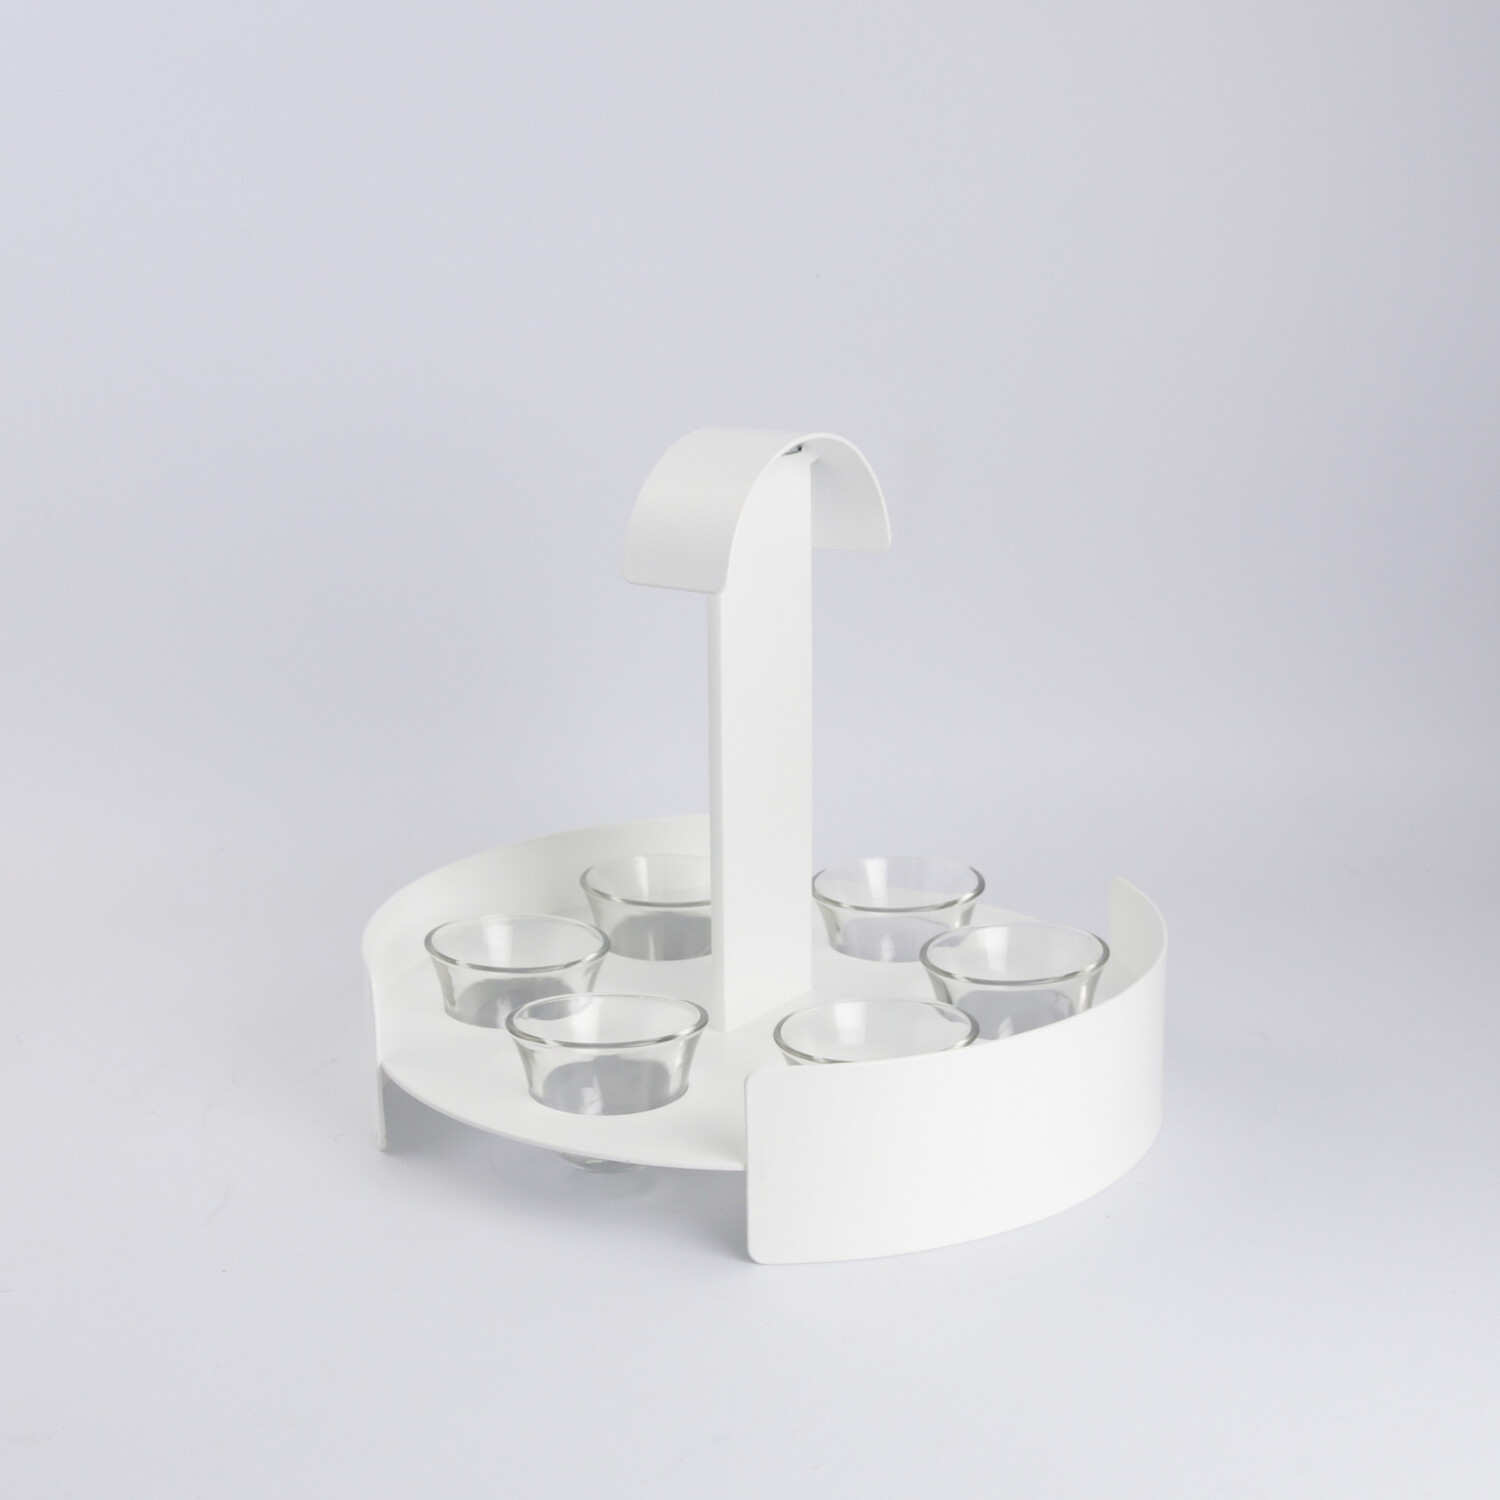 Coffee Cups Stand - Iron - White